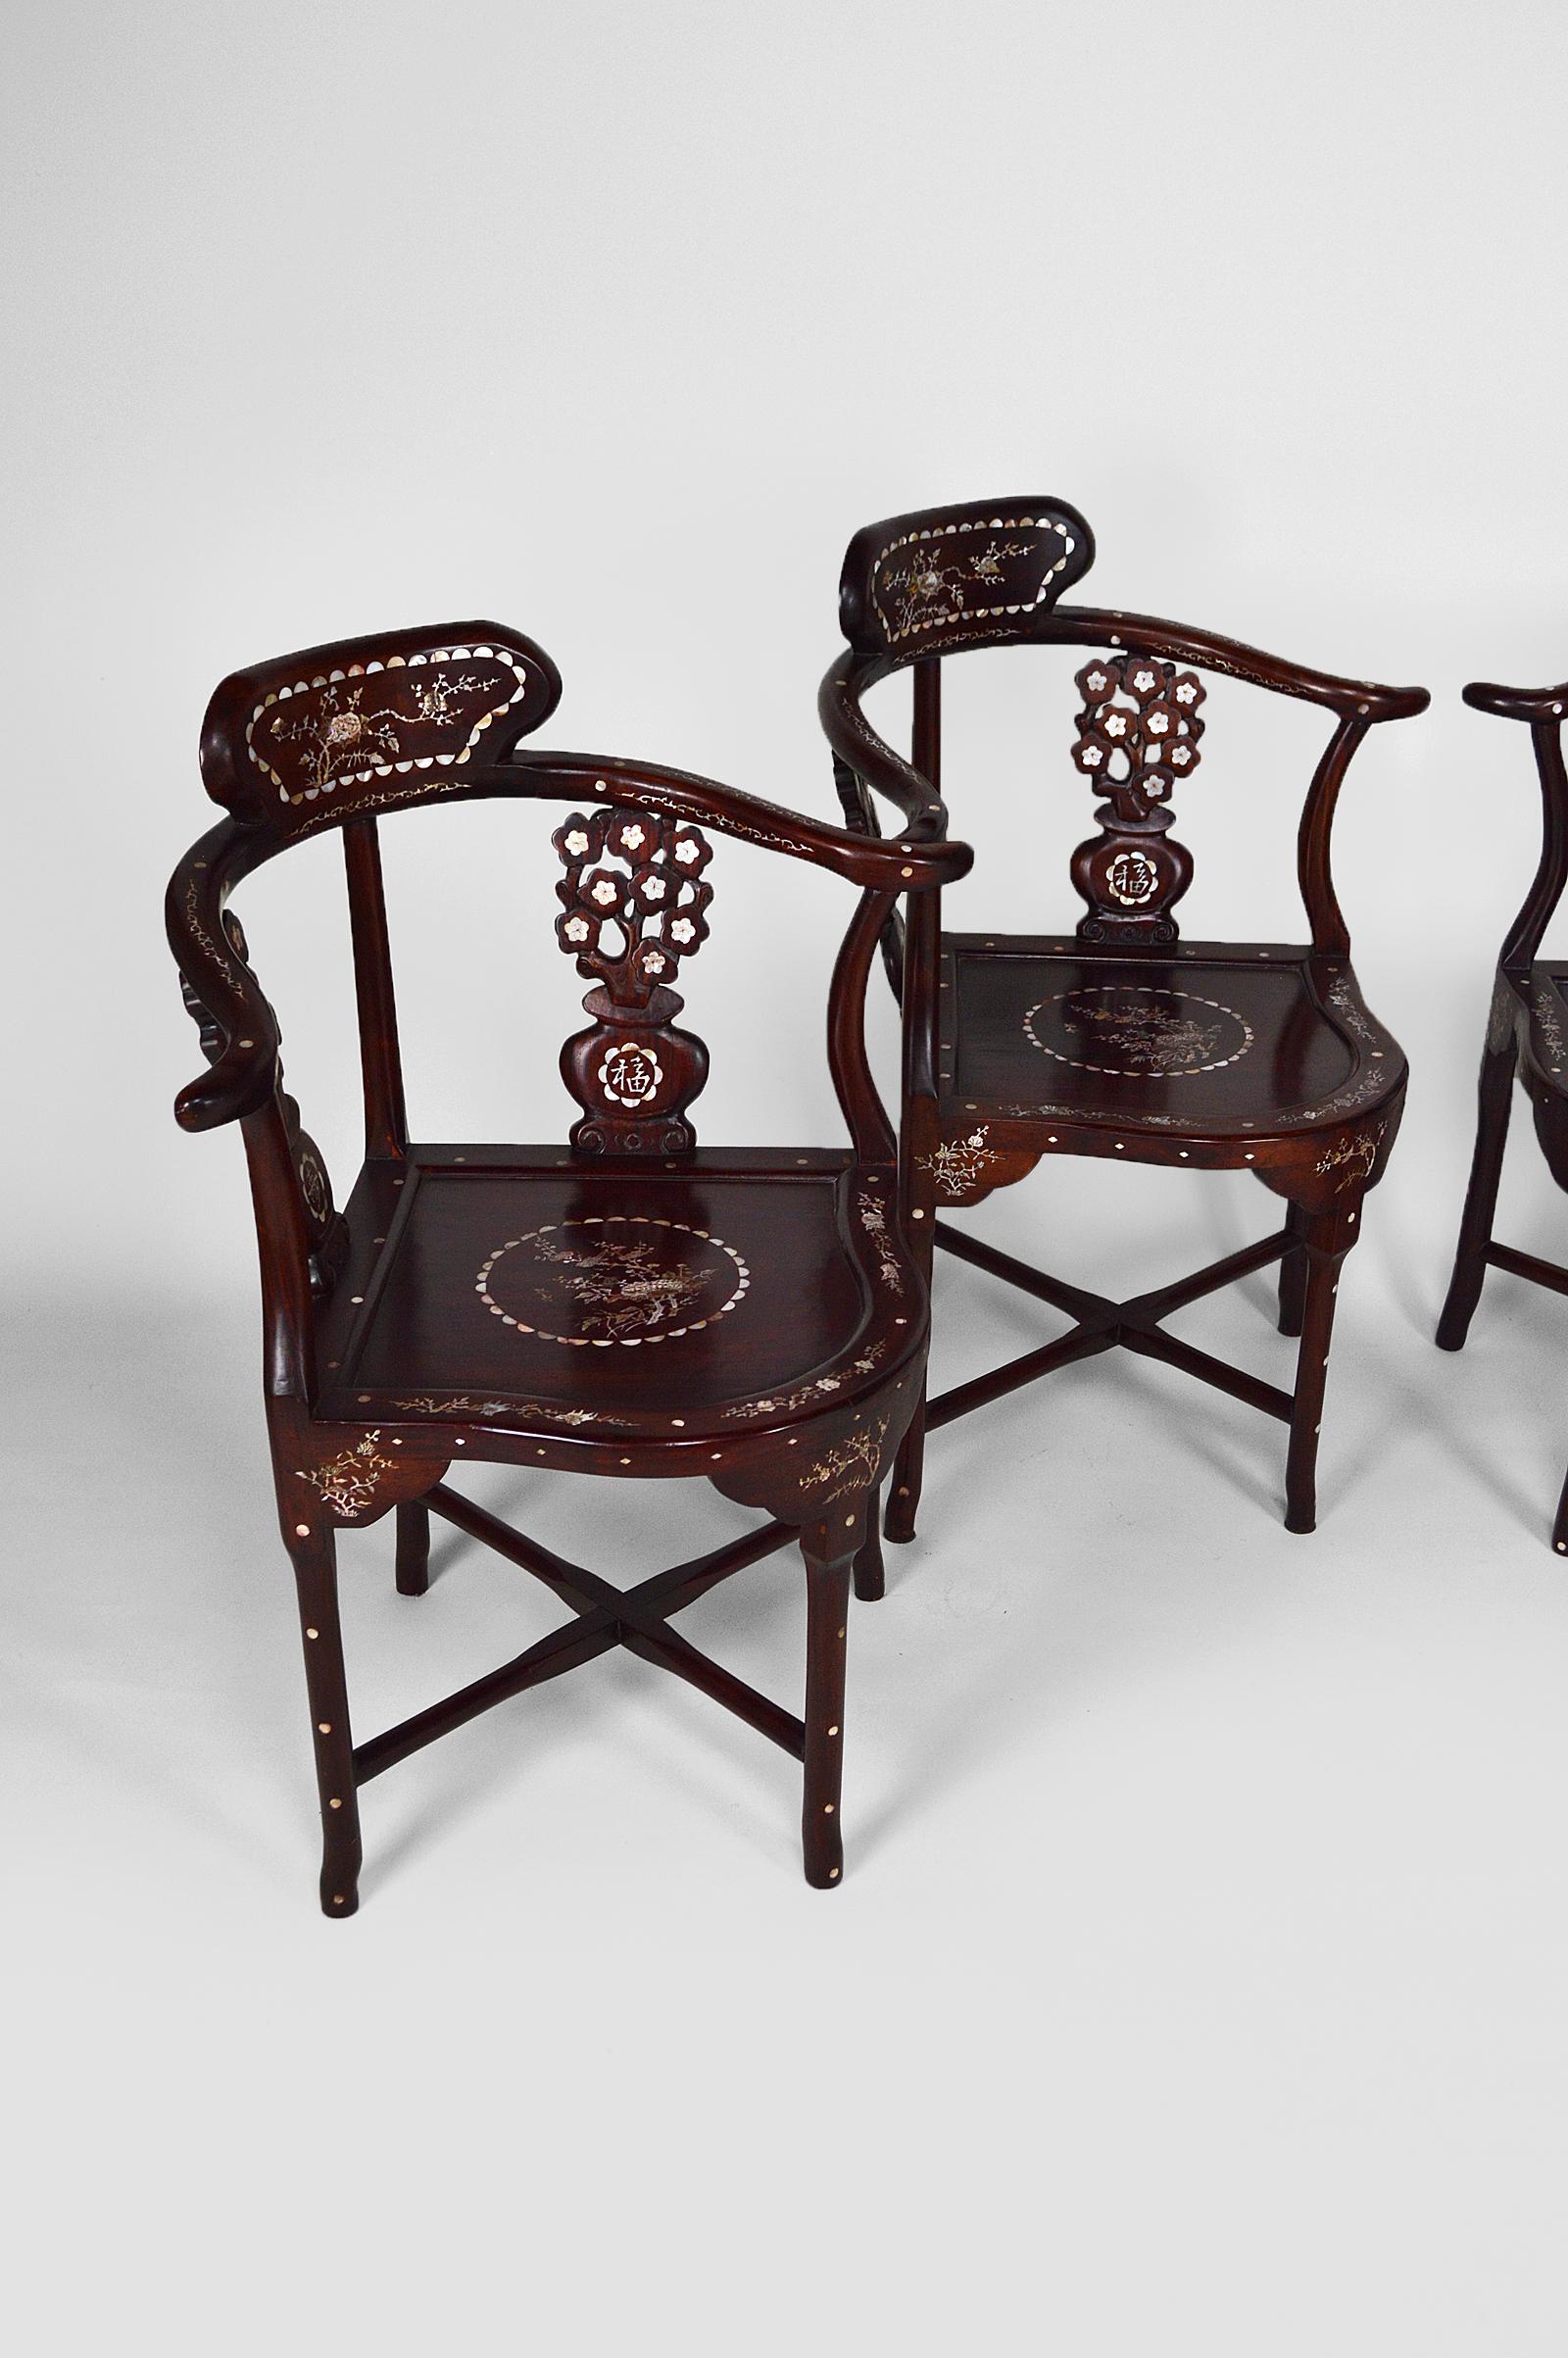 Chinese Set of 4 Asian Armchairs in Carved and Inlaid Wood, circa 1900-1920 For Sale